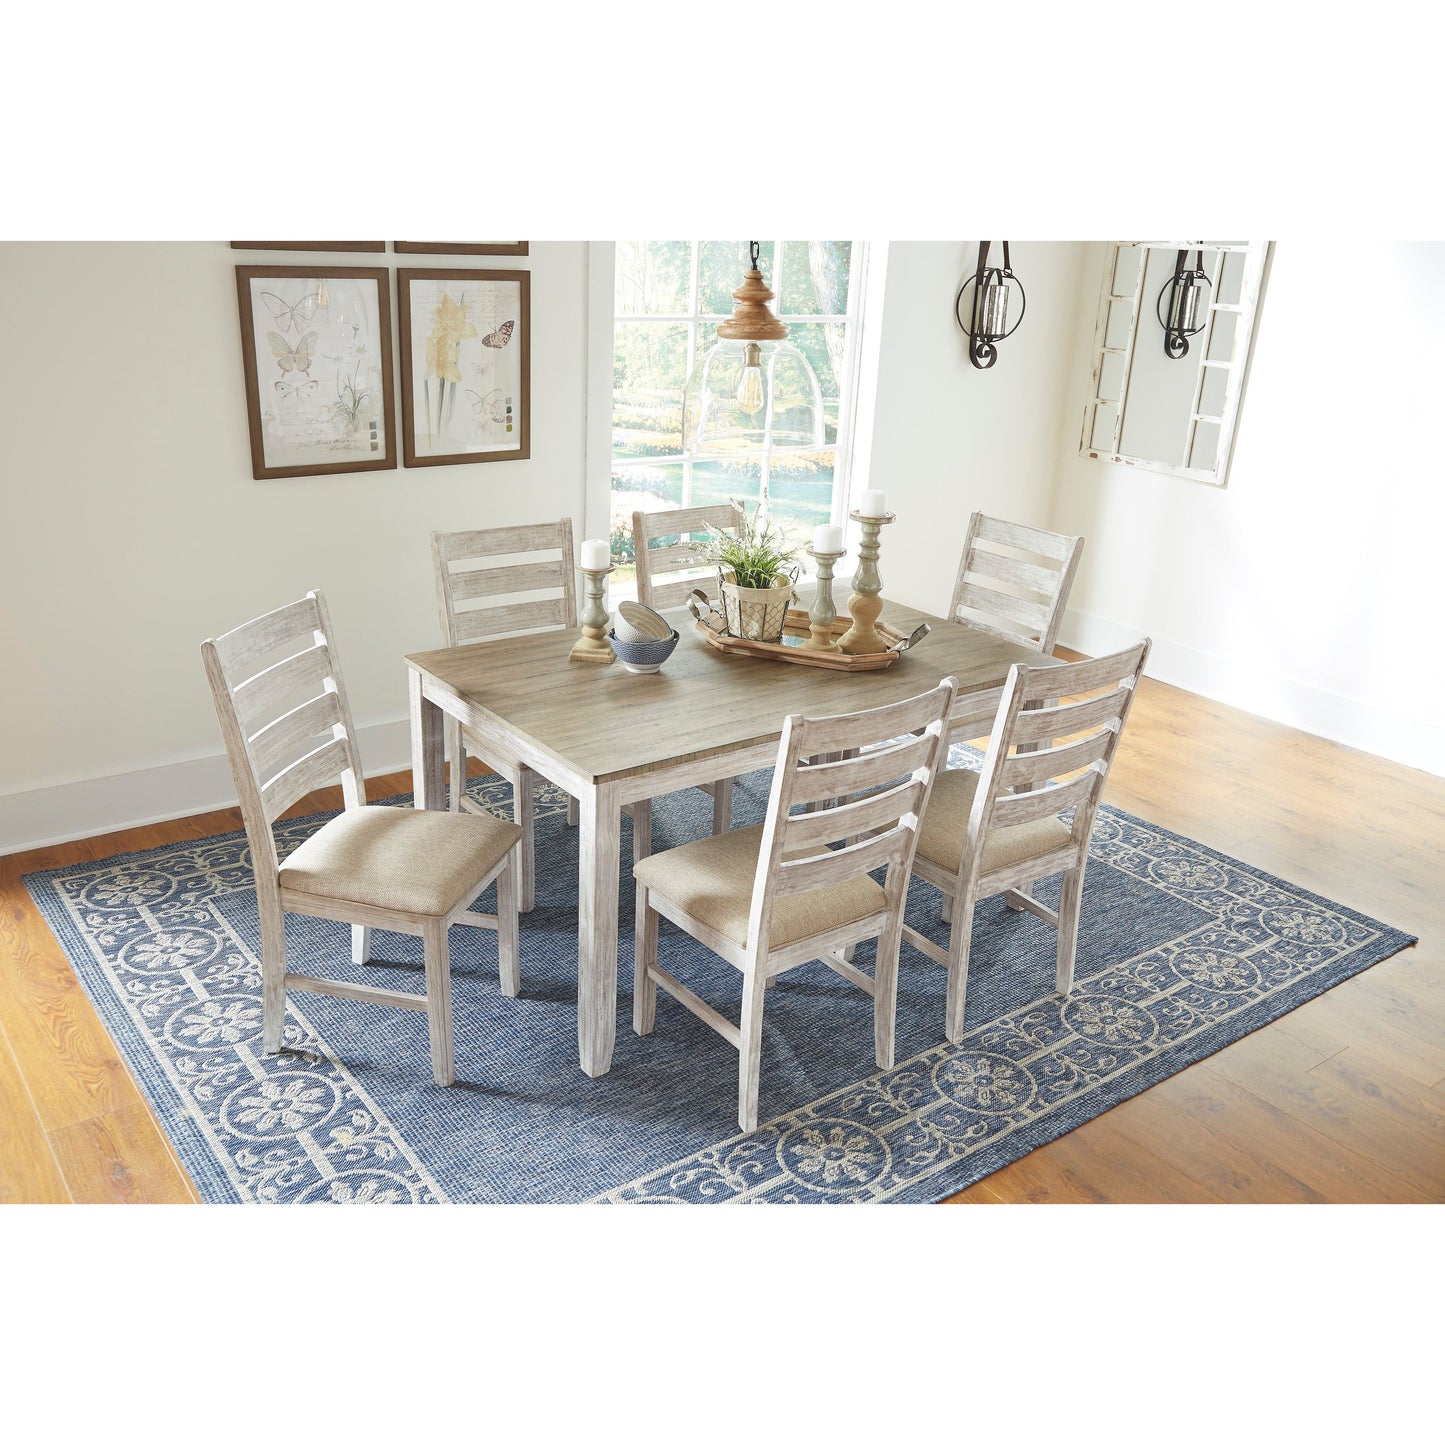 SKEMPTON DINING SET - 6 CHAIRS AND TABLE